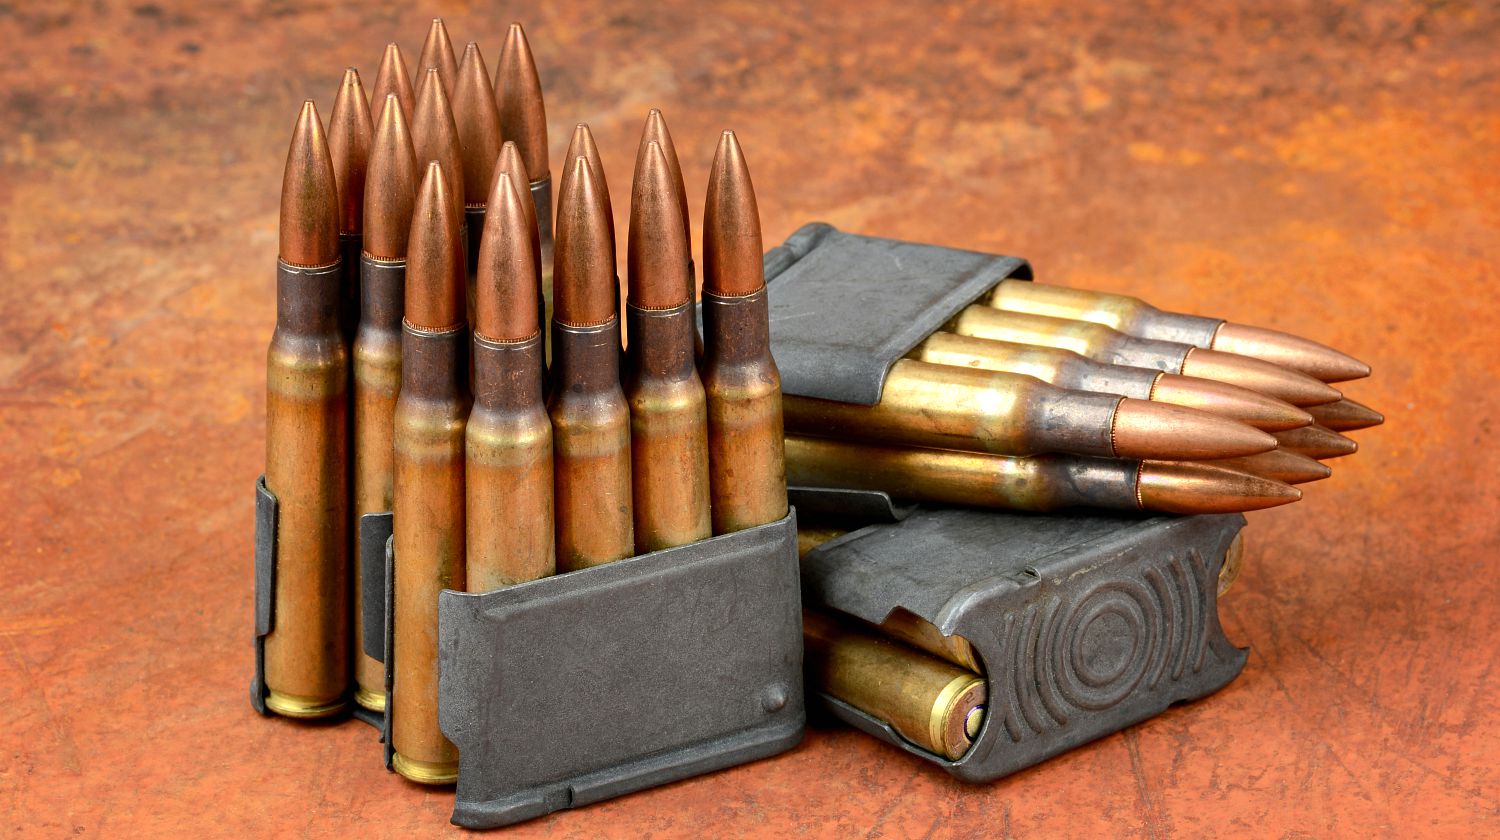 World war II M1 clips and 30-06 ammunition on rusty background | Modern Shooter: .30-06 Springfield | Featured